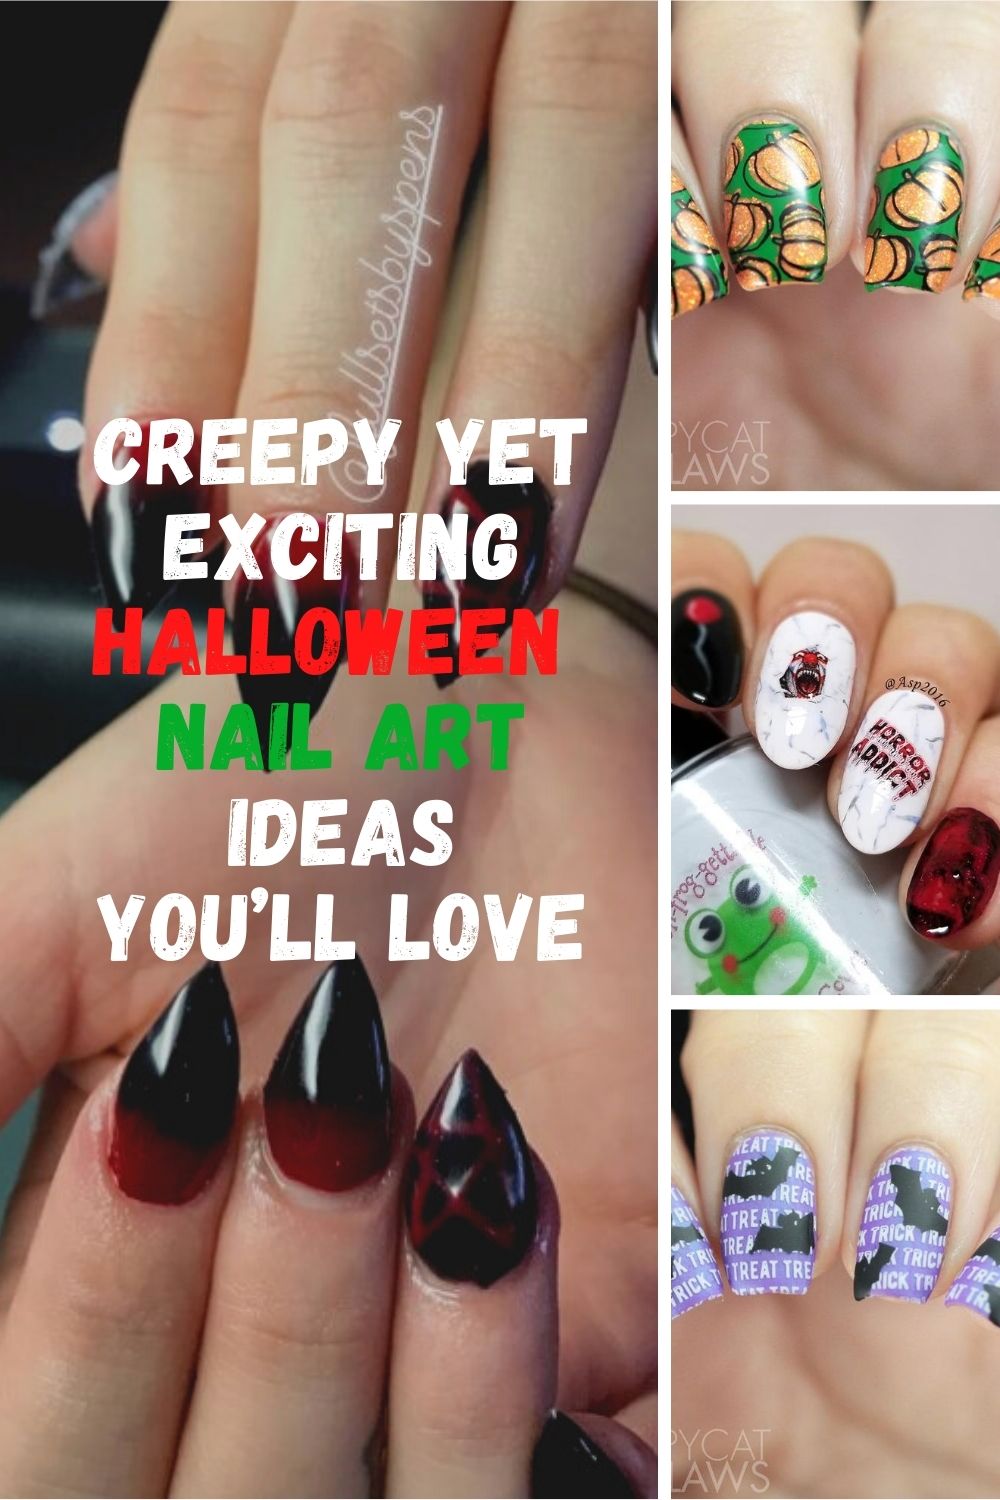 Creepy yet Exciting Halloween Nail Art Ideas you’ll love